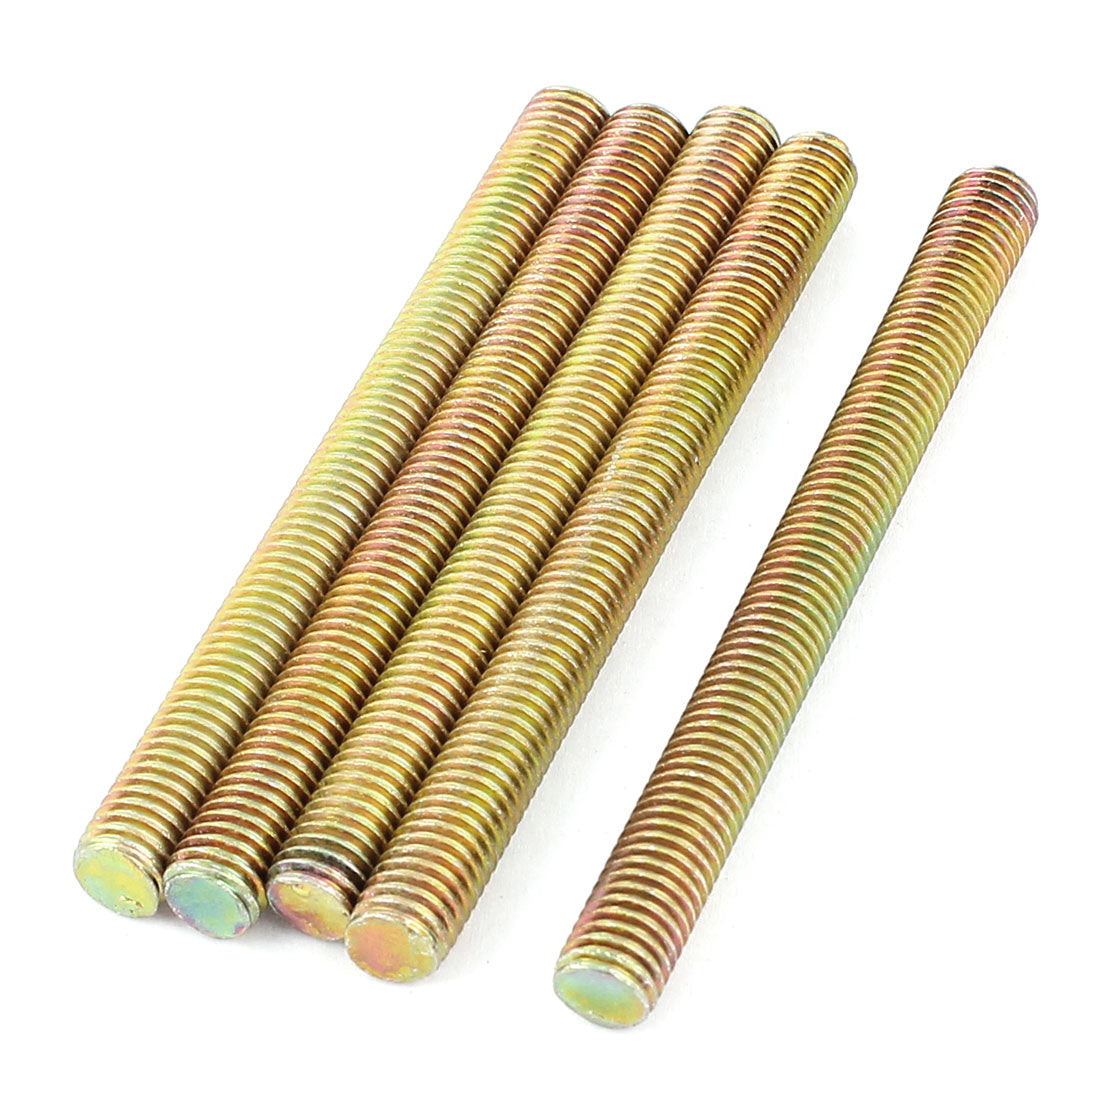 uxcell Uxcell 1.25mm Pitch M8 x 90mm Male Threaded Rod Bar Bronze Tone 5 Pcs